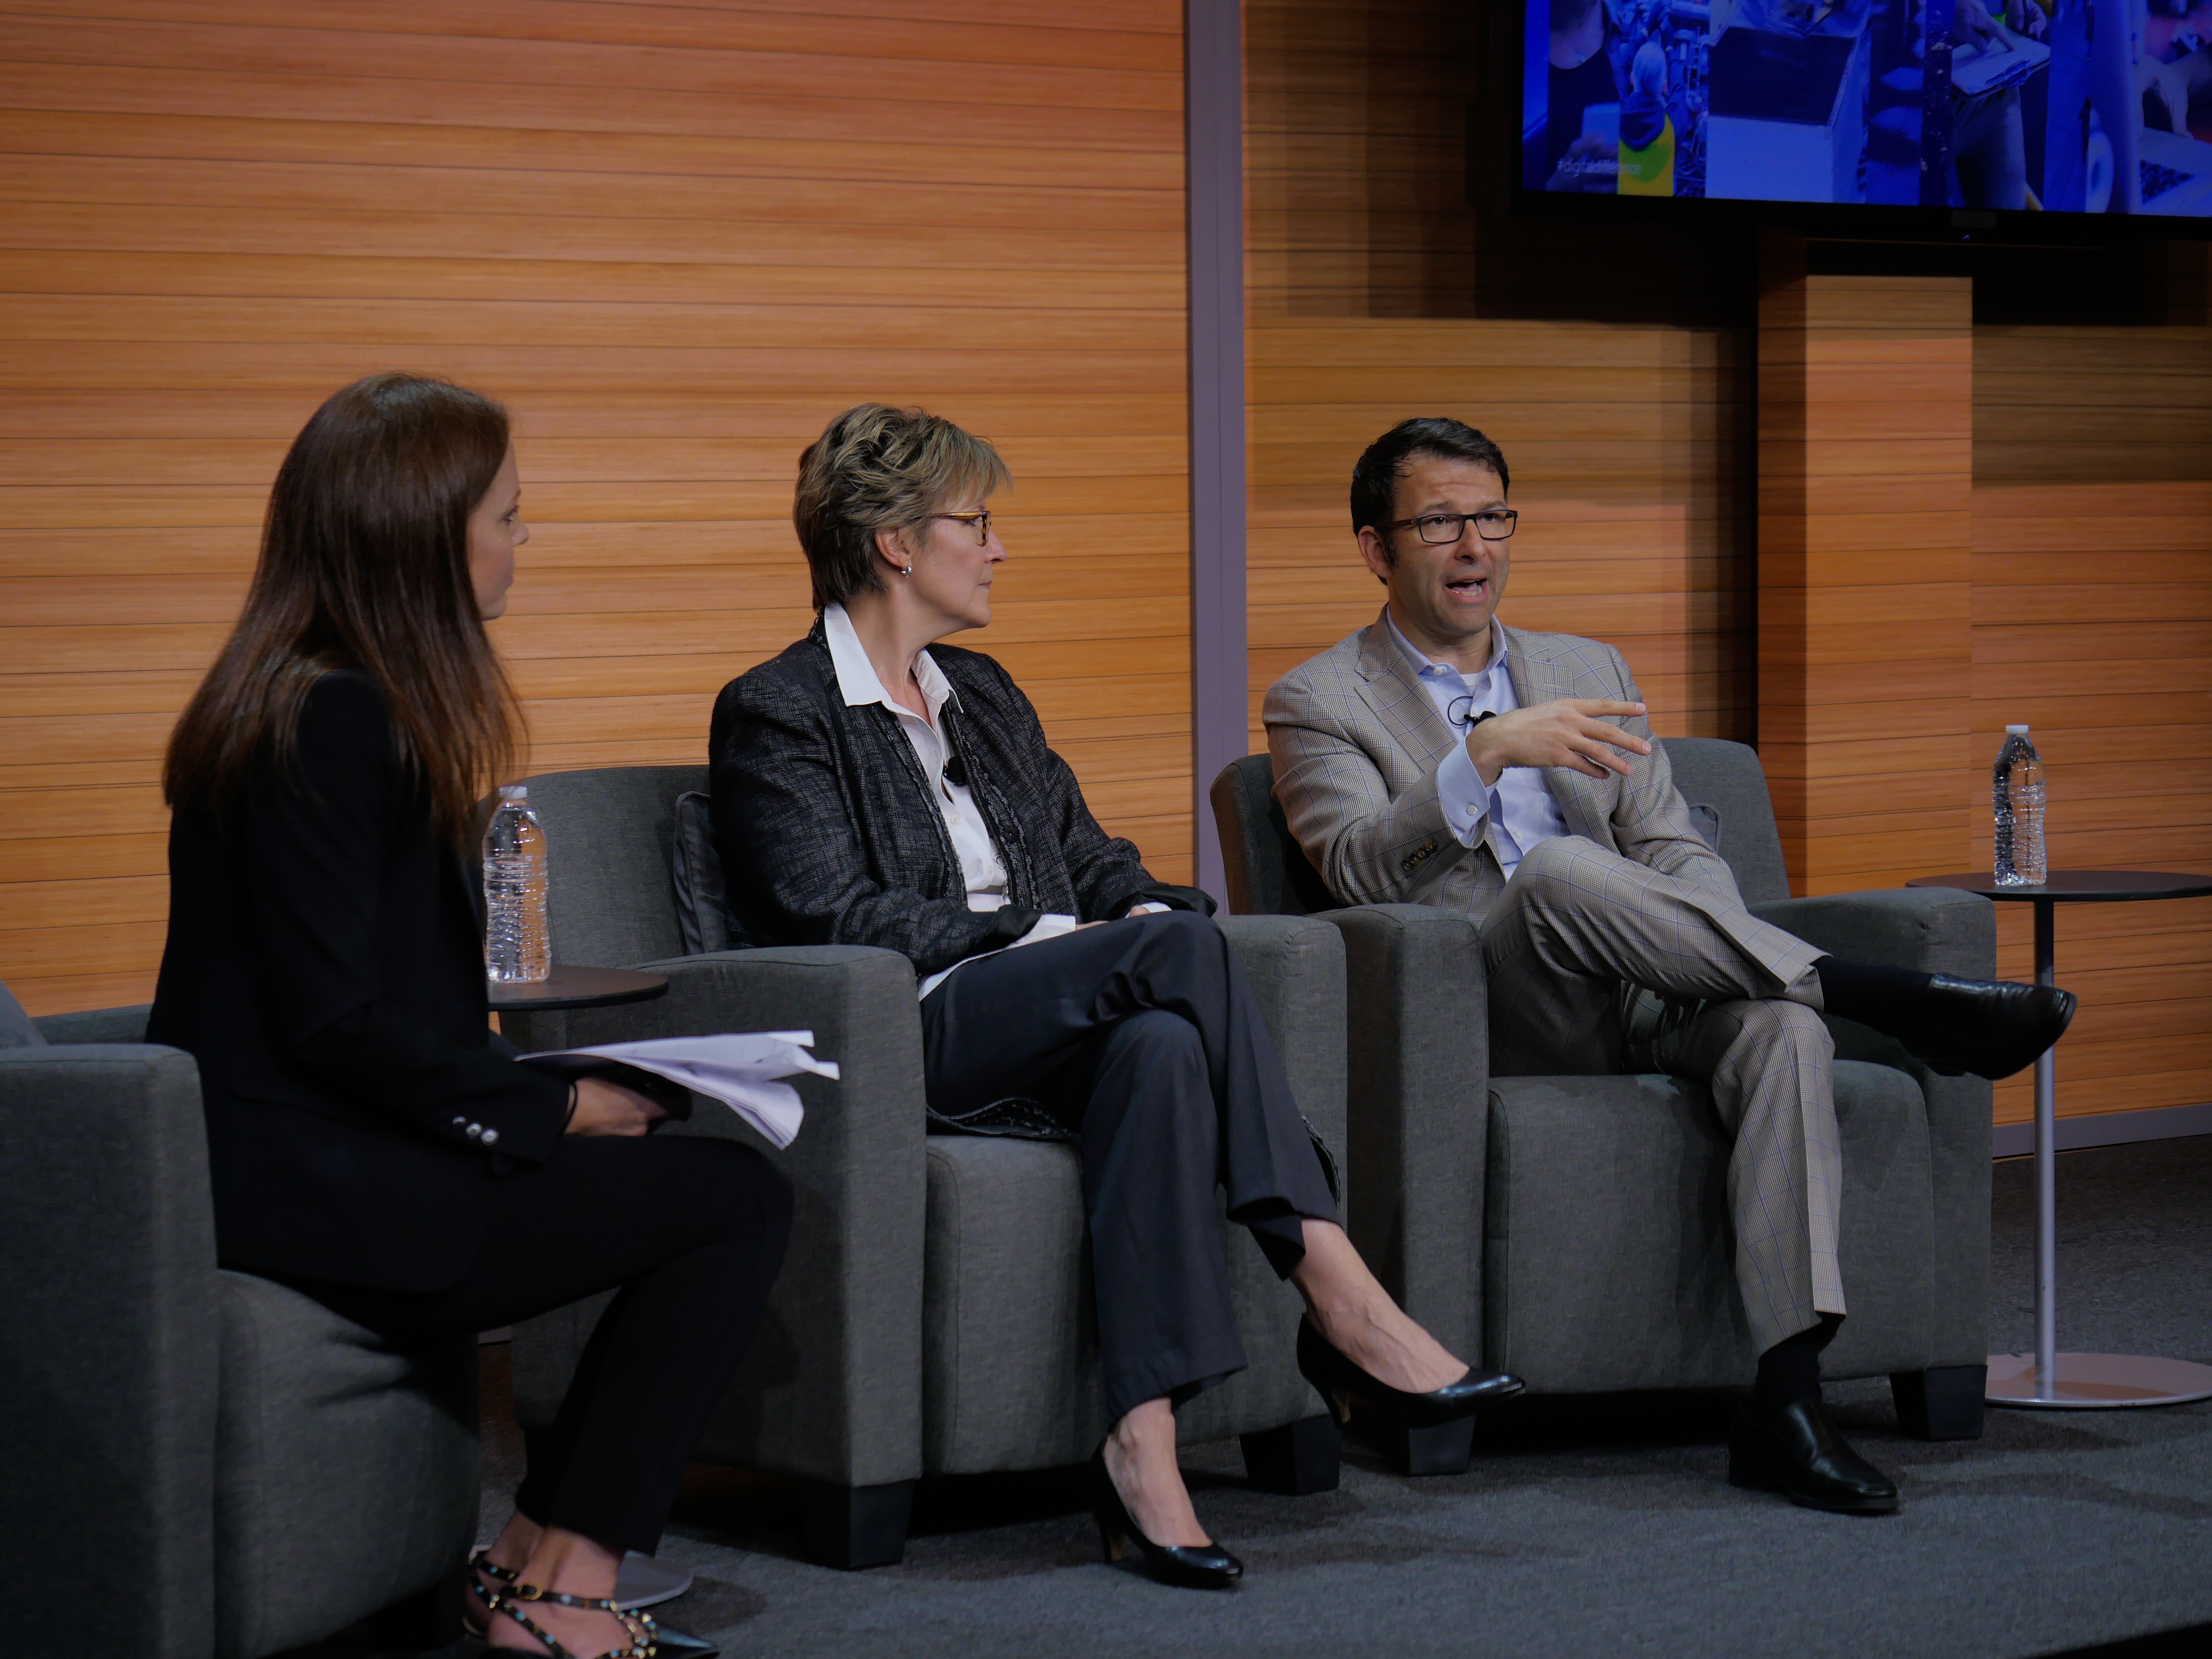 Photo of Widsteen, Lundberg and Althoff discussing digital transformation on stage